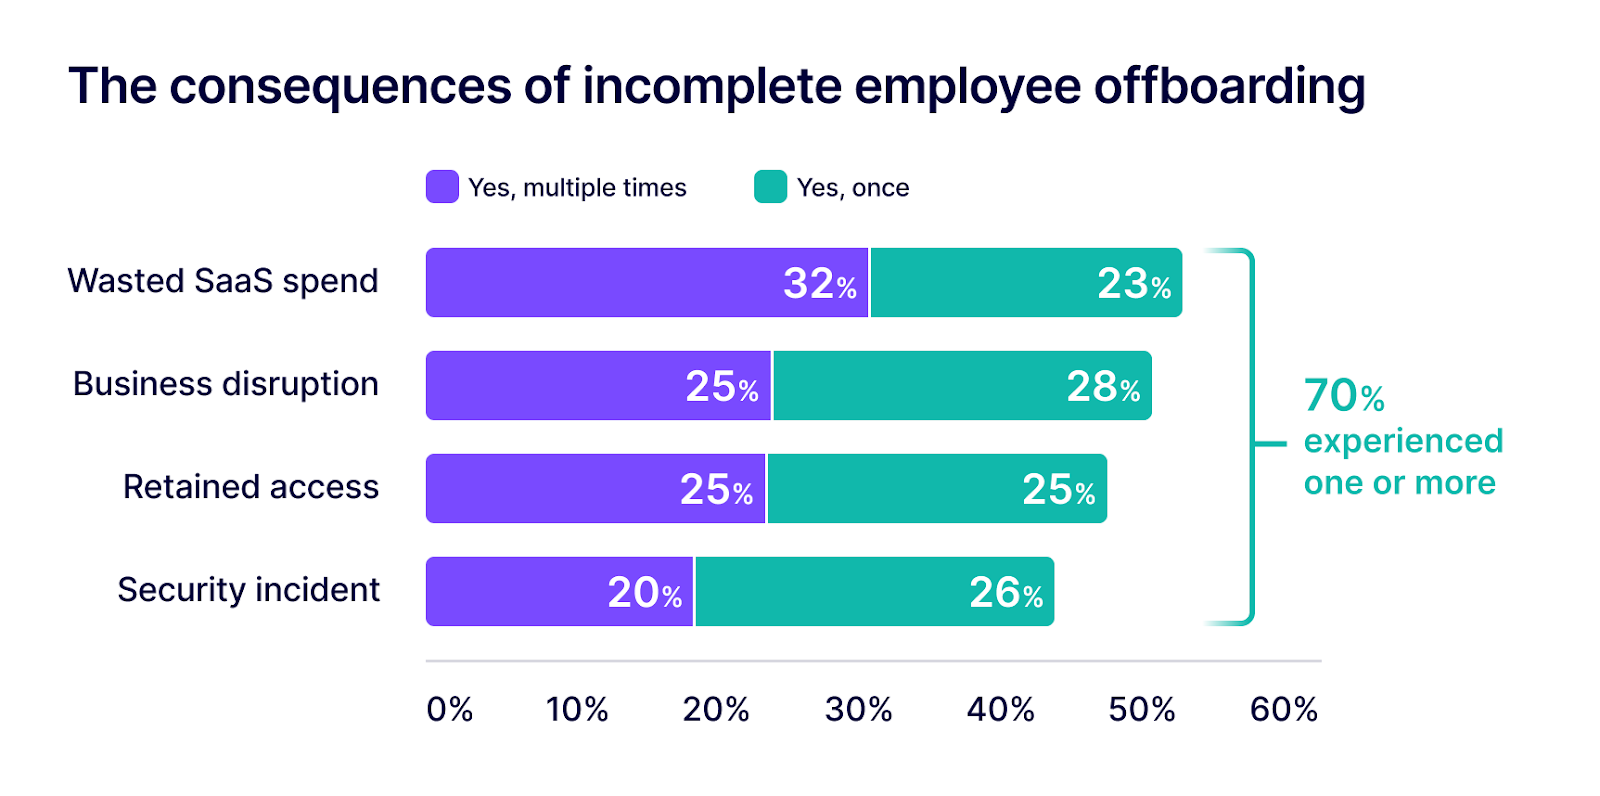 Poor or incomplete offboarding could have many negative consequences if employee access isn't revoked promptly.